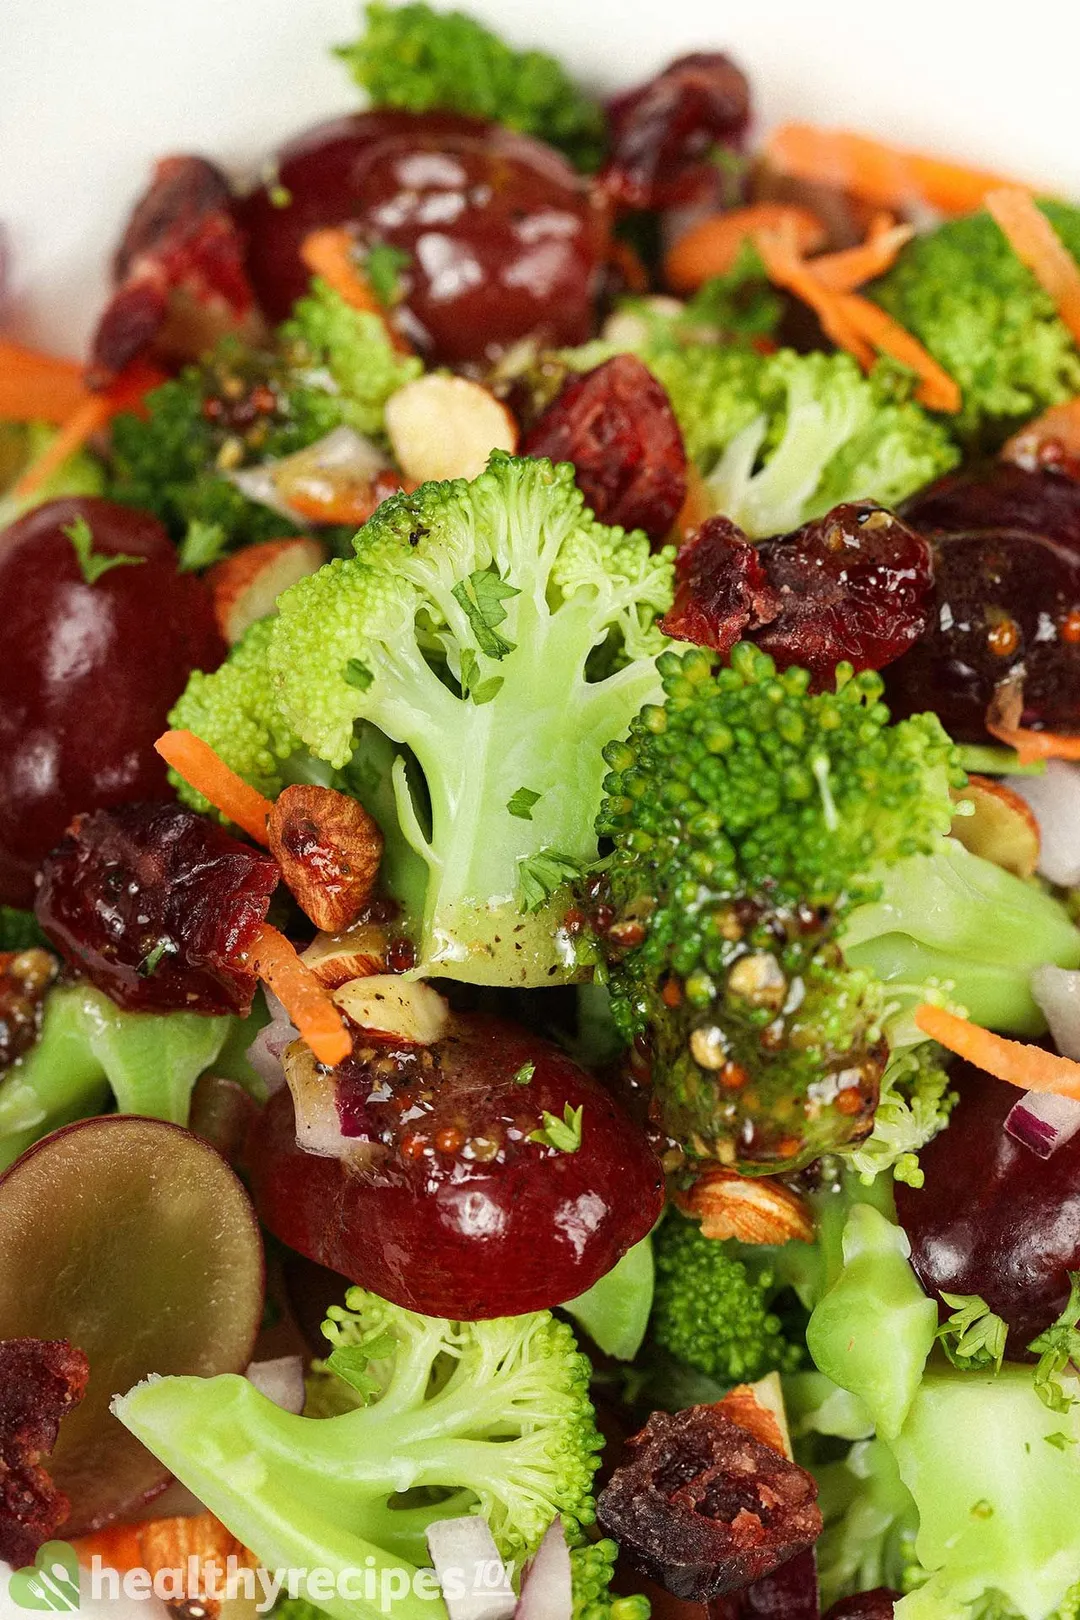 A close-up shot of vegan broccoli salad, including broccoli florets, red grapes, and carrot strips.